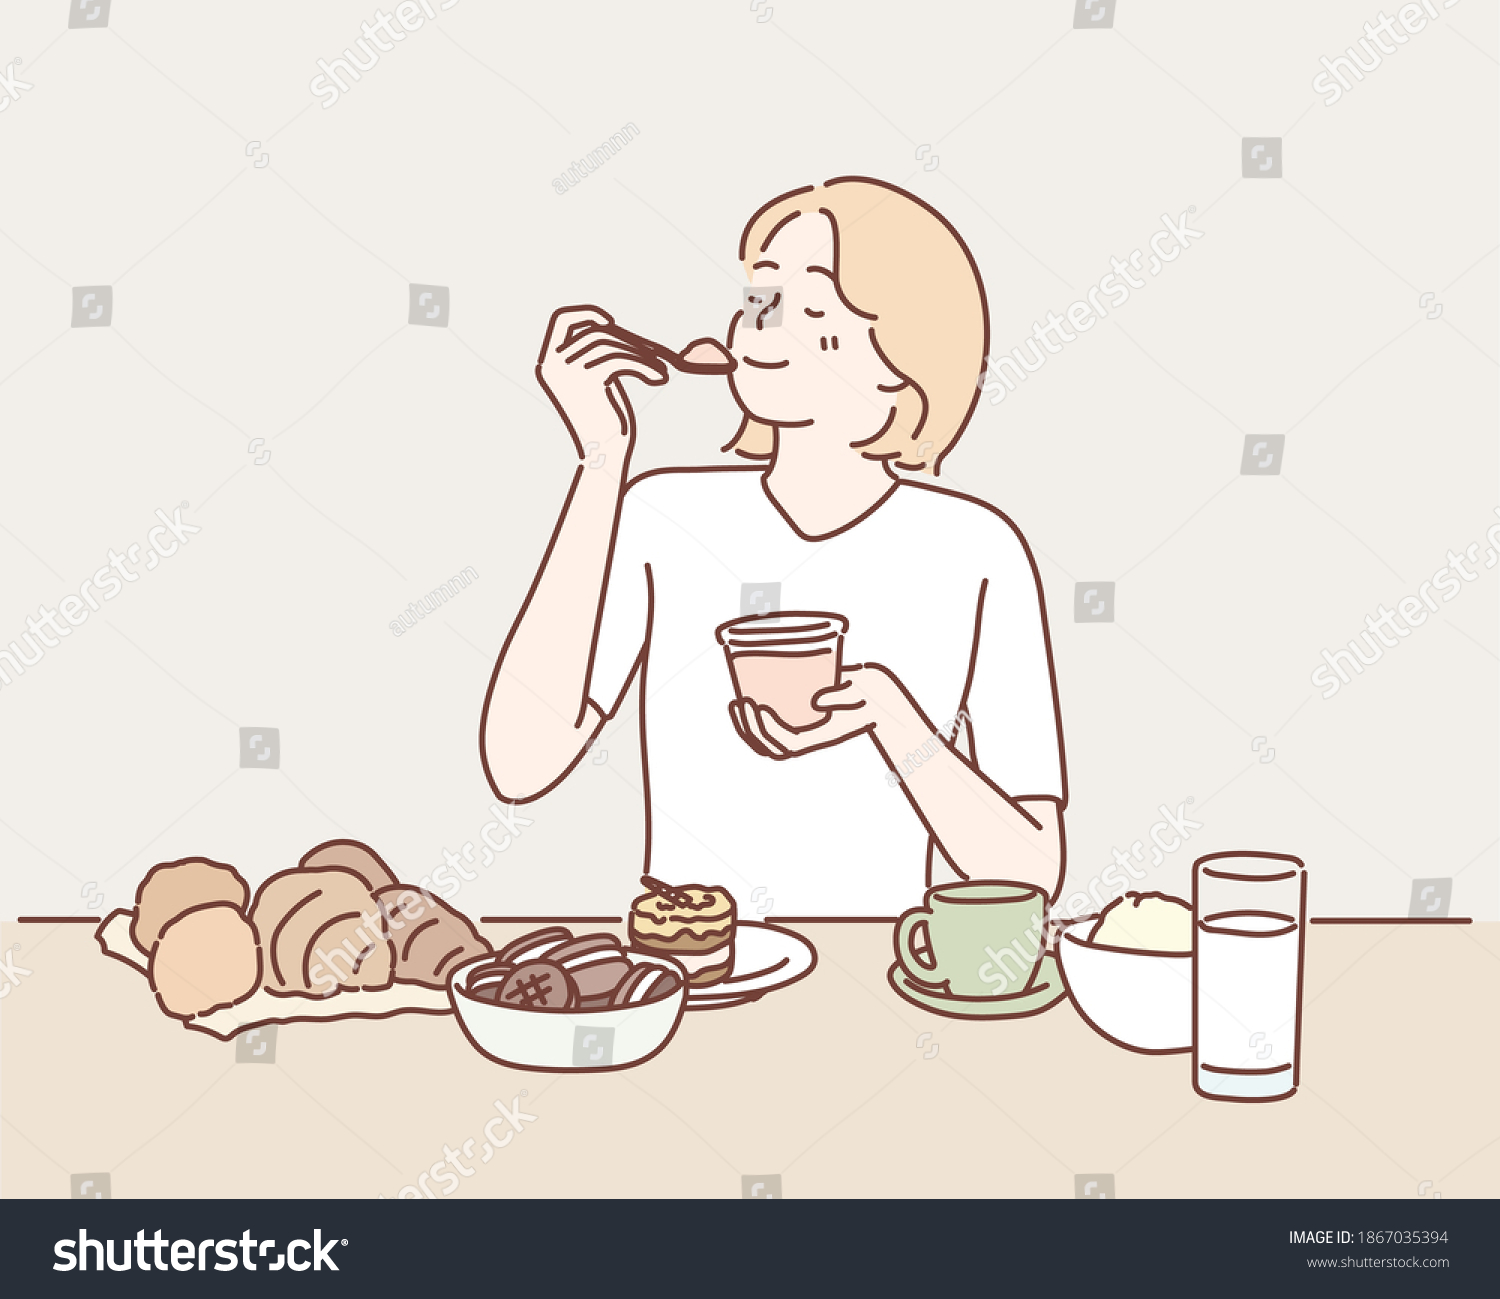 Woman sits at table overloaded with many desserts. Hand drawn style vector design illustrations. #1867035394